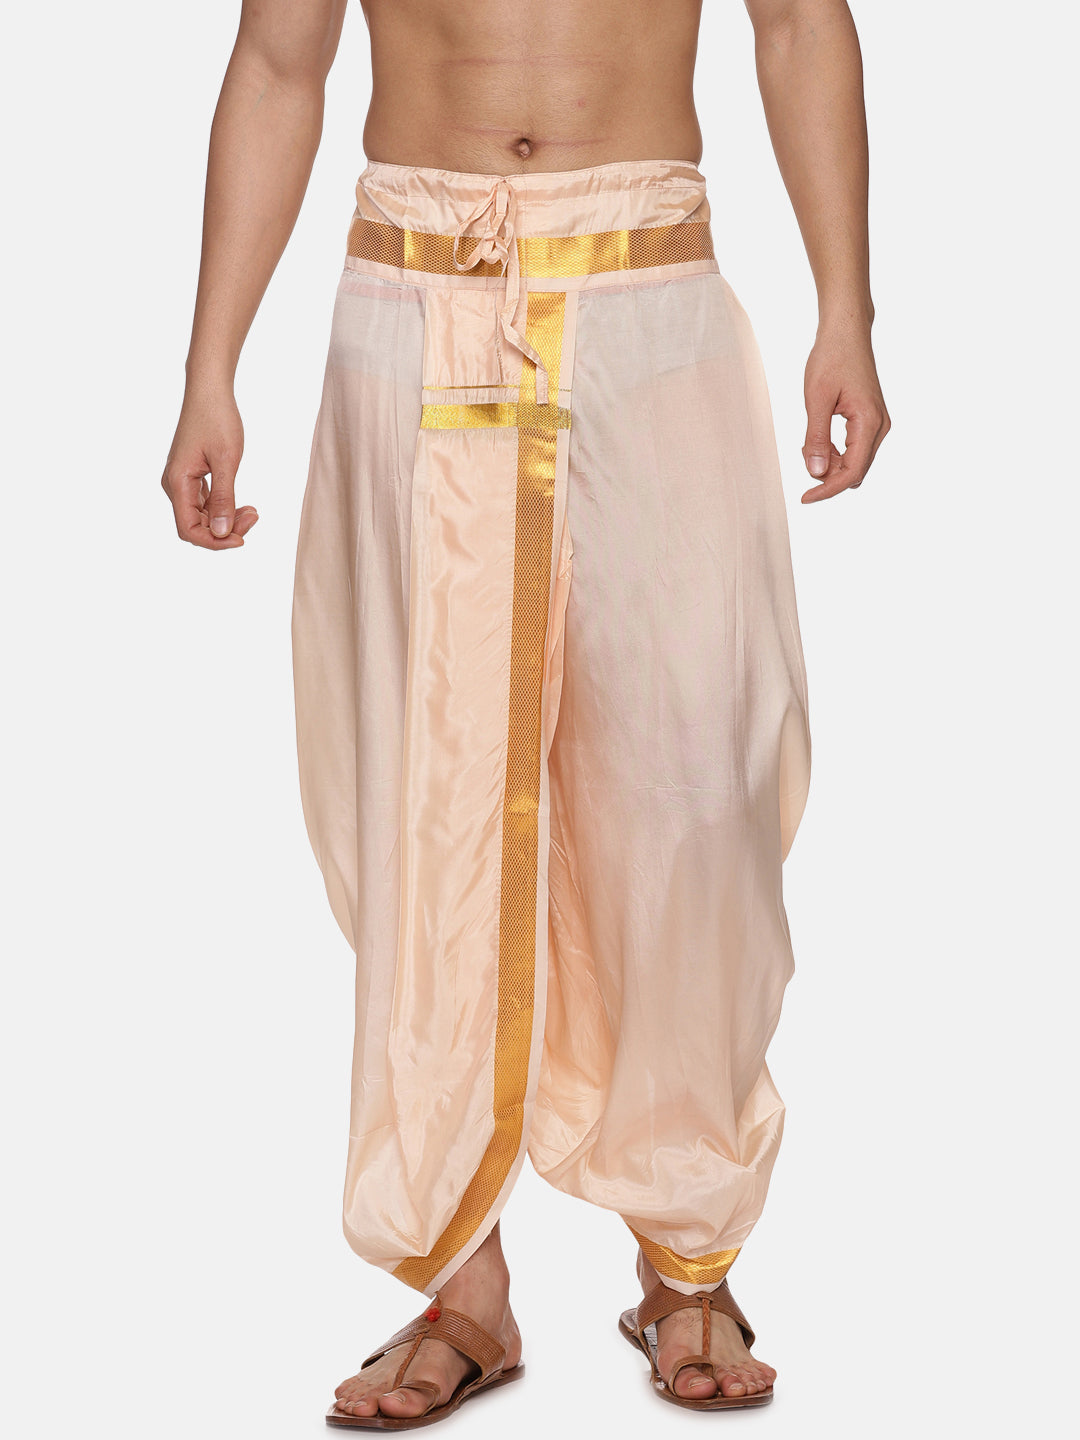 The Dhoti and Why It's So Important in India